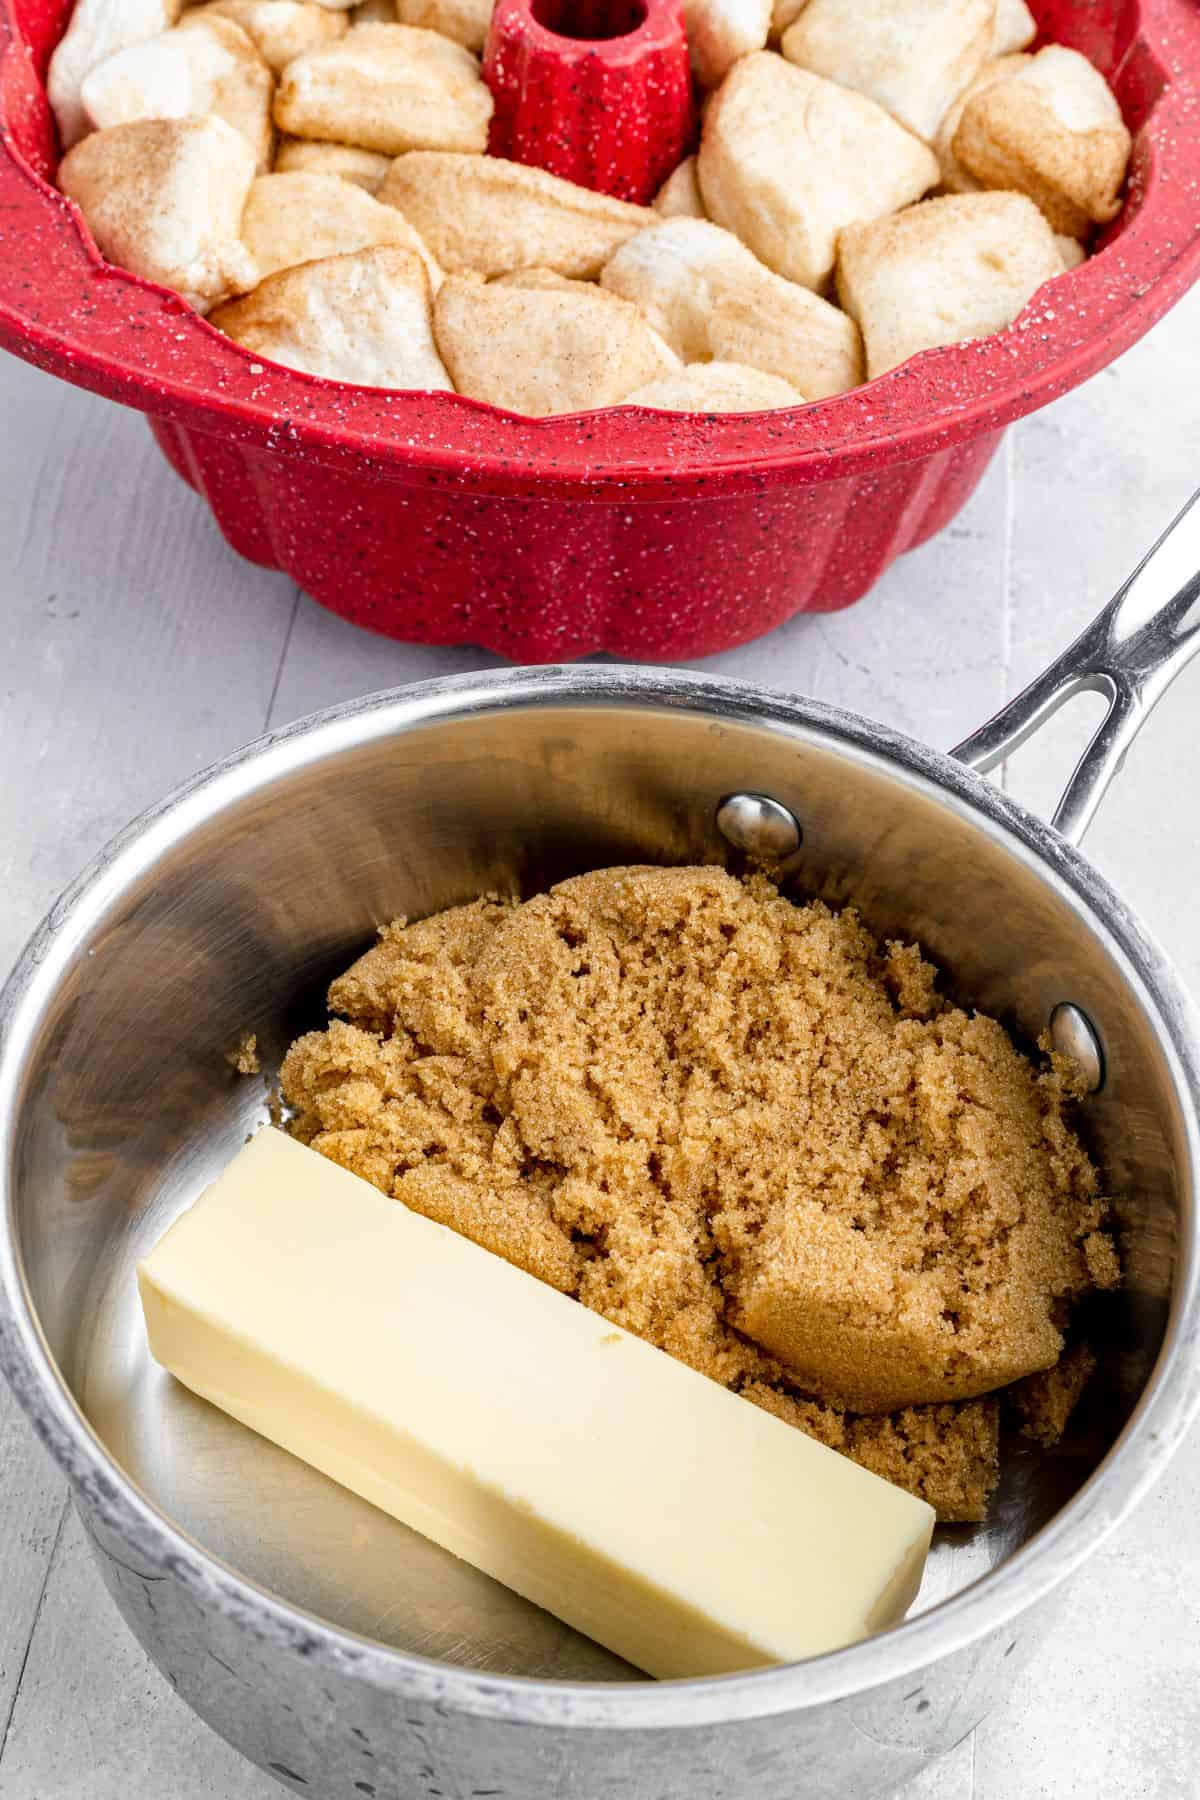 A Bundt pan filled with biscuit dough pieces sits next to a saucepan containing a stick of butter and some brown sugar.